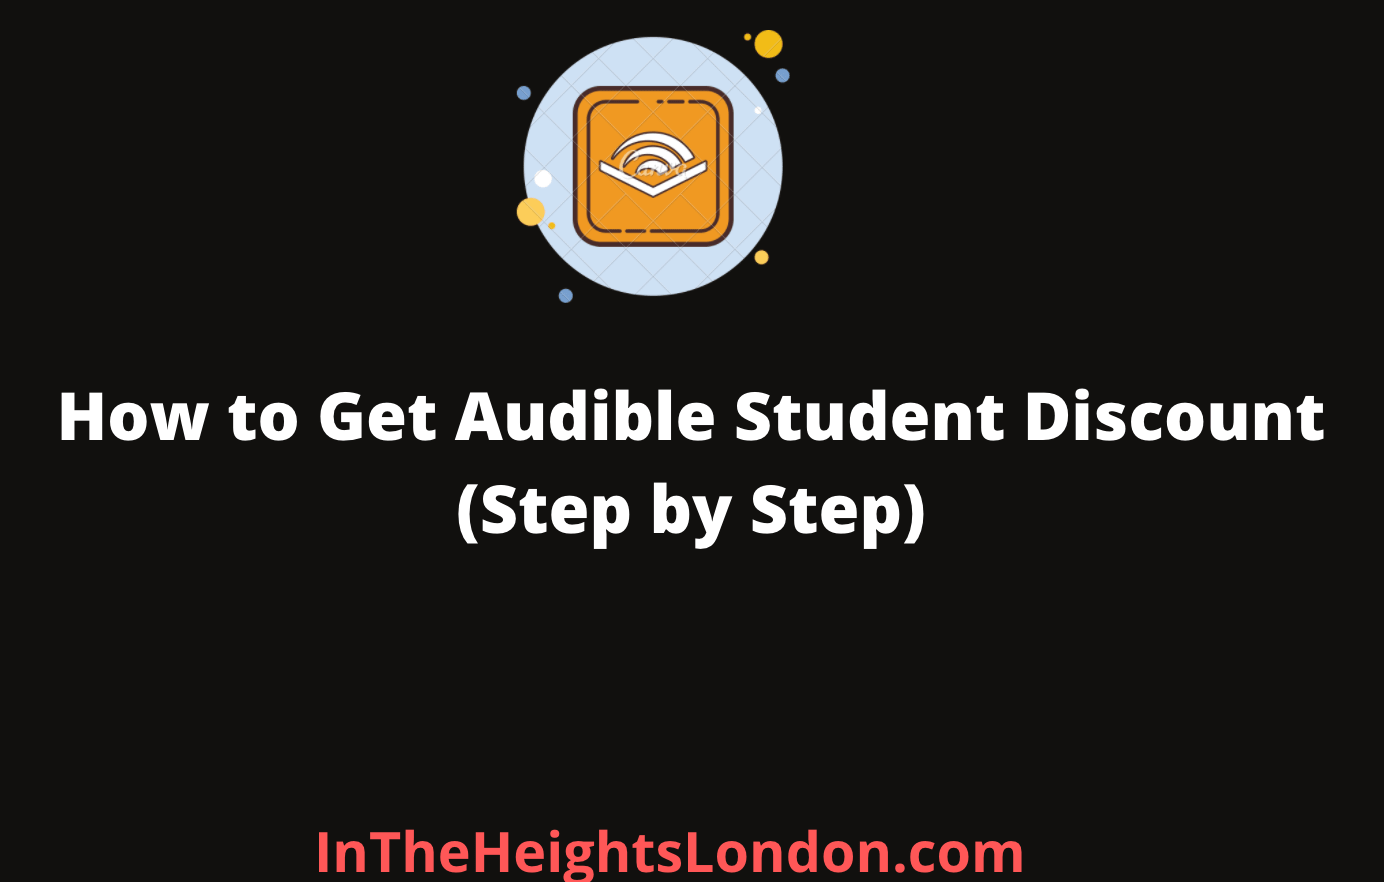 Audible Student Discount